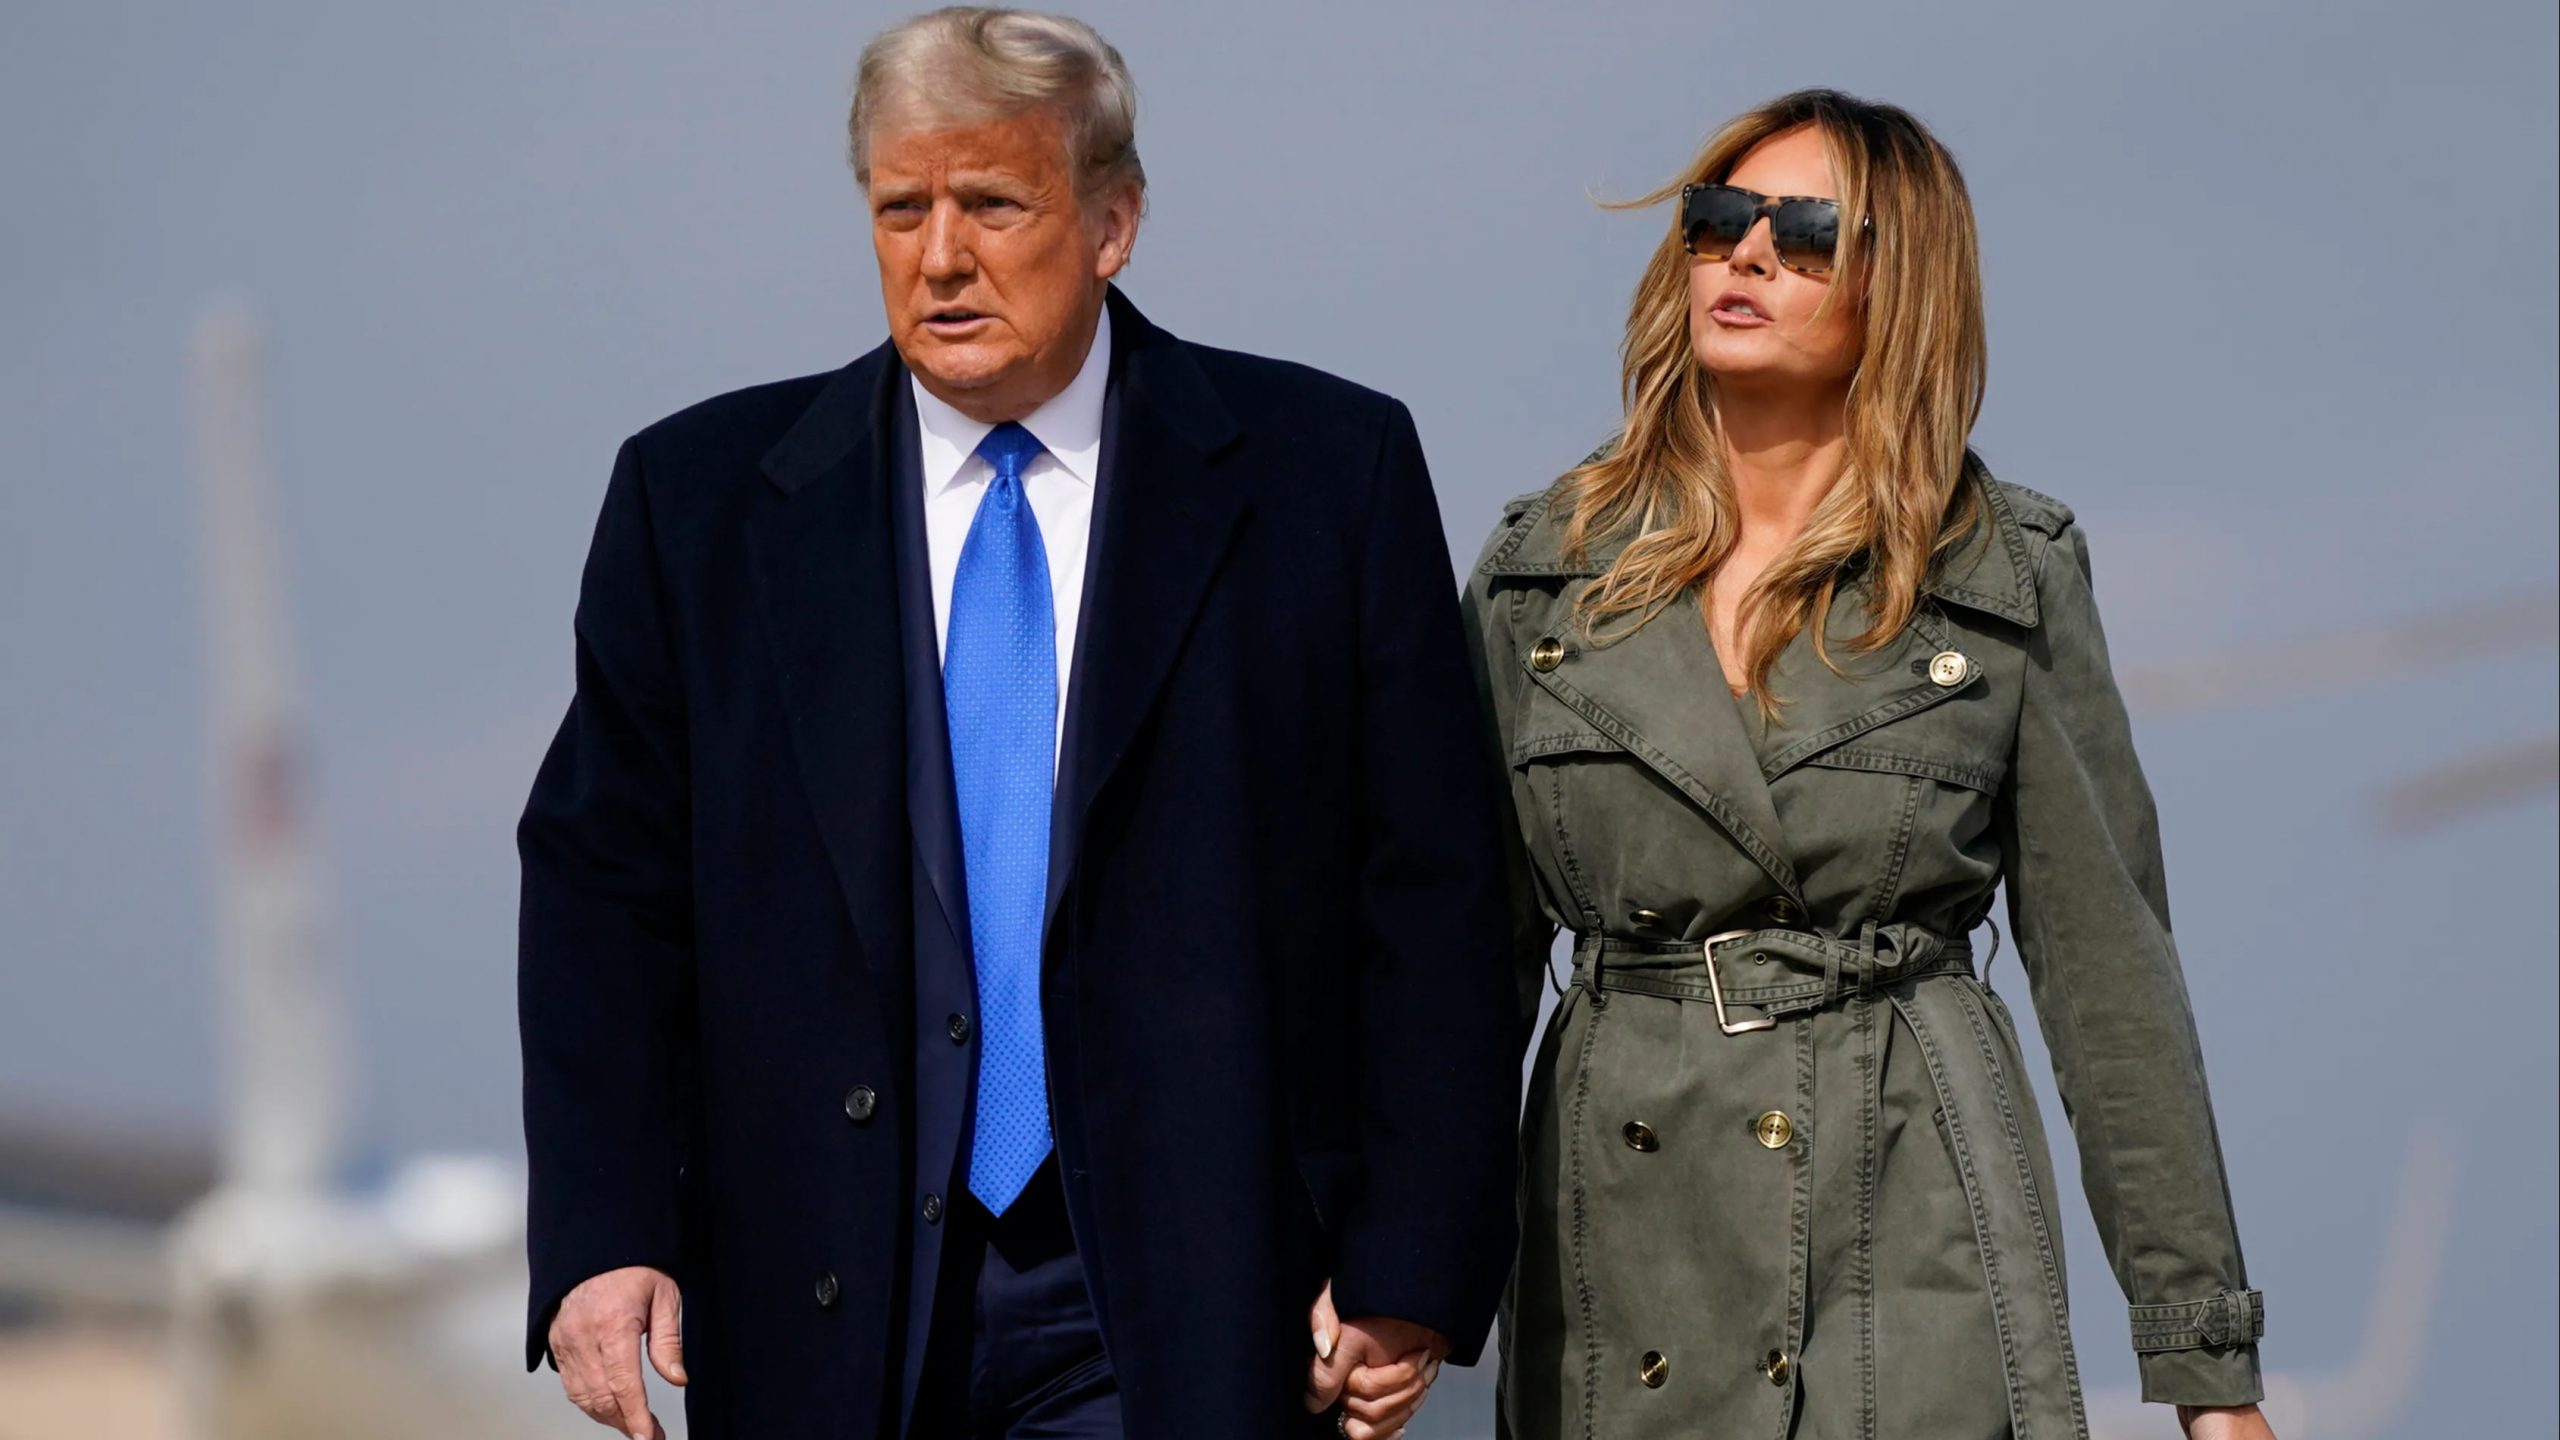 Donald Trump is a fighter, he fights for you every single day, says Melania Trump